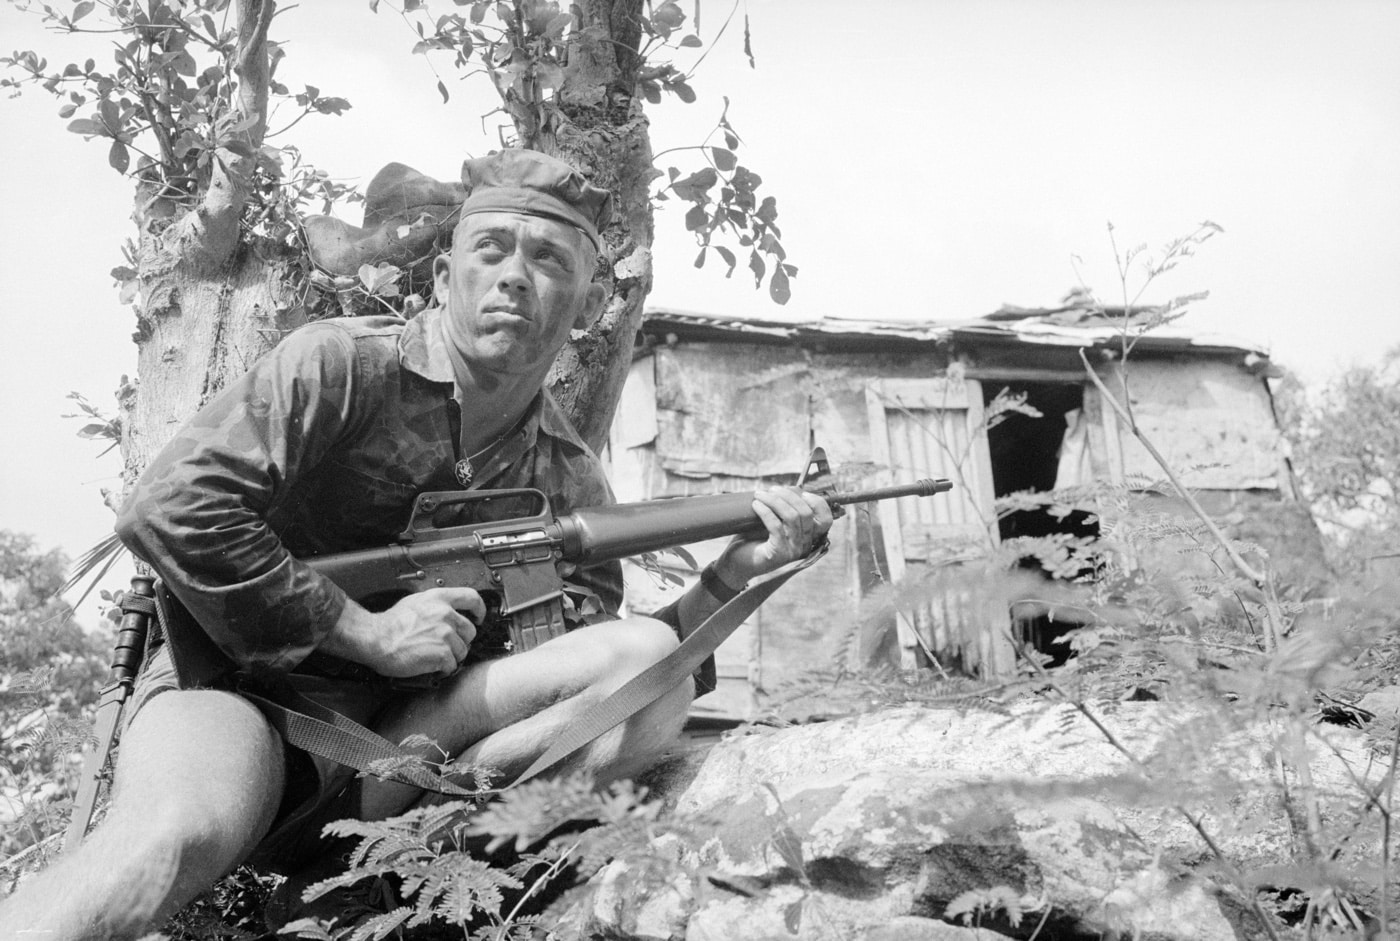 us navy seal armed with ar-15 model 601 in training st thomas us virgin islands navy 1963 rifle island